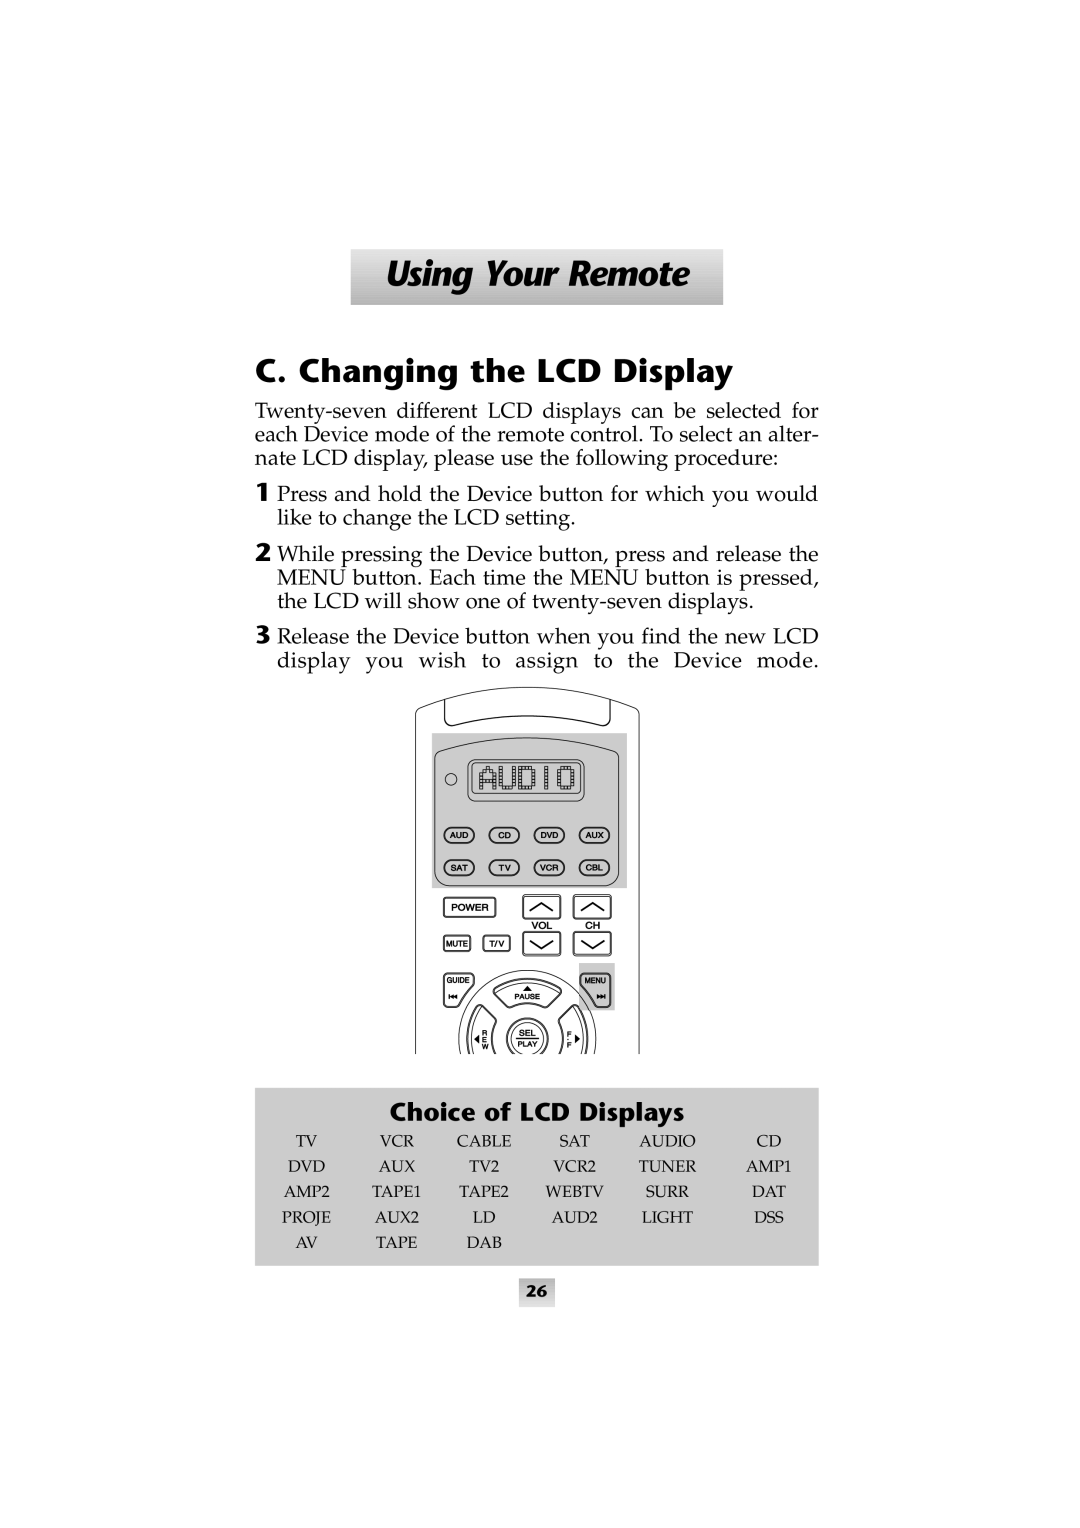 Universal Remote Control SL-8000 manual C. Changing the LCD Display, Choice of LCD Displays, Using Your Remote 